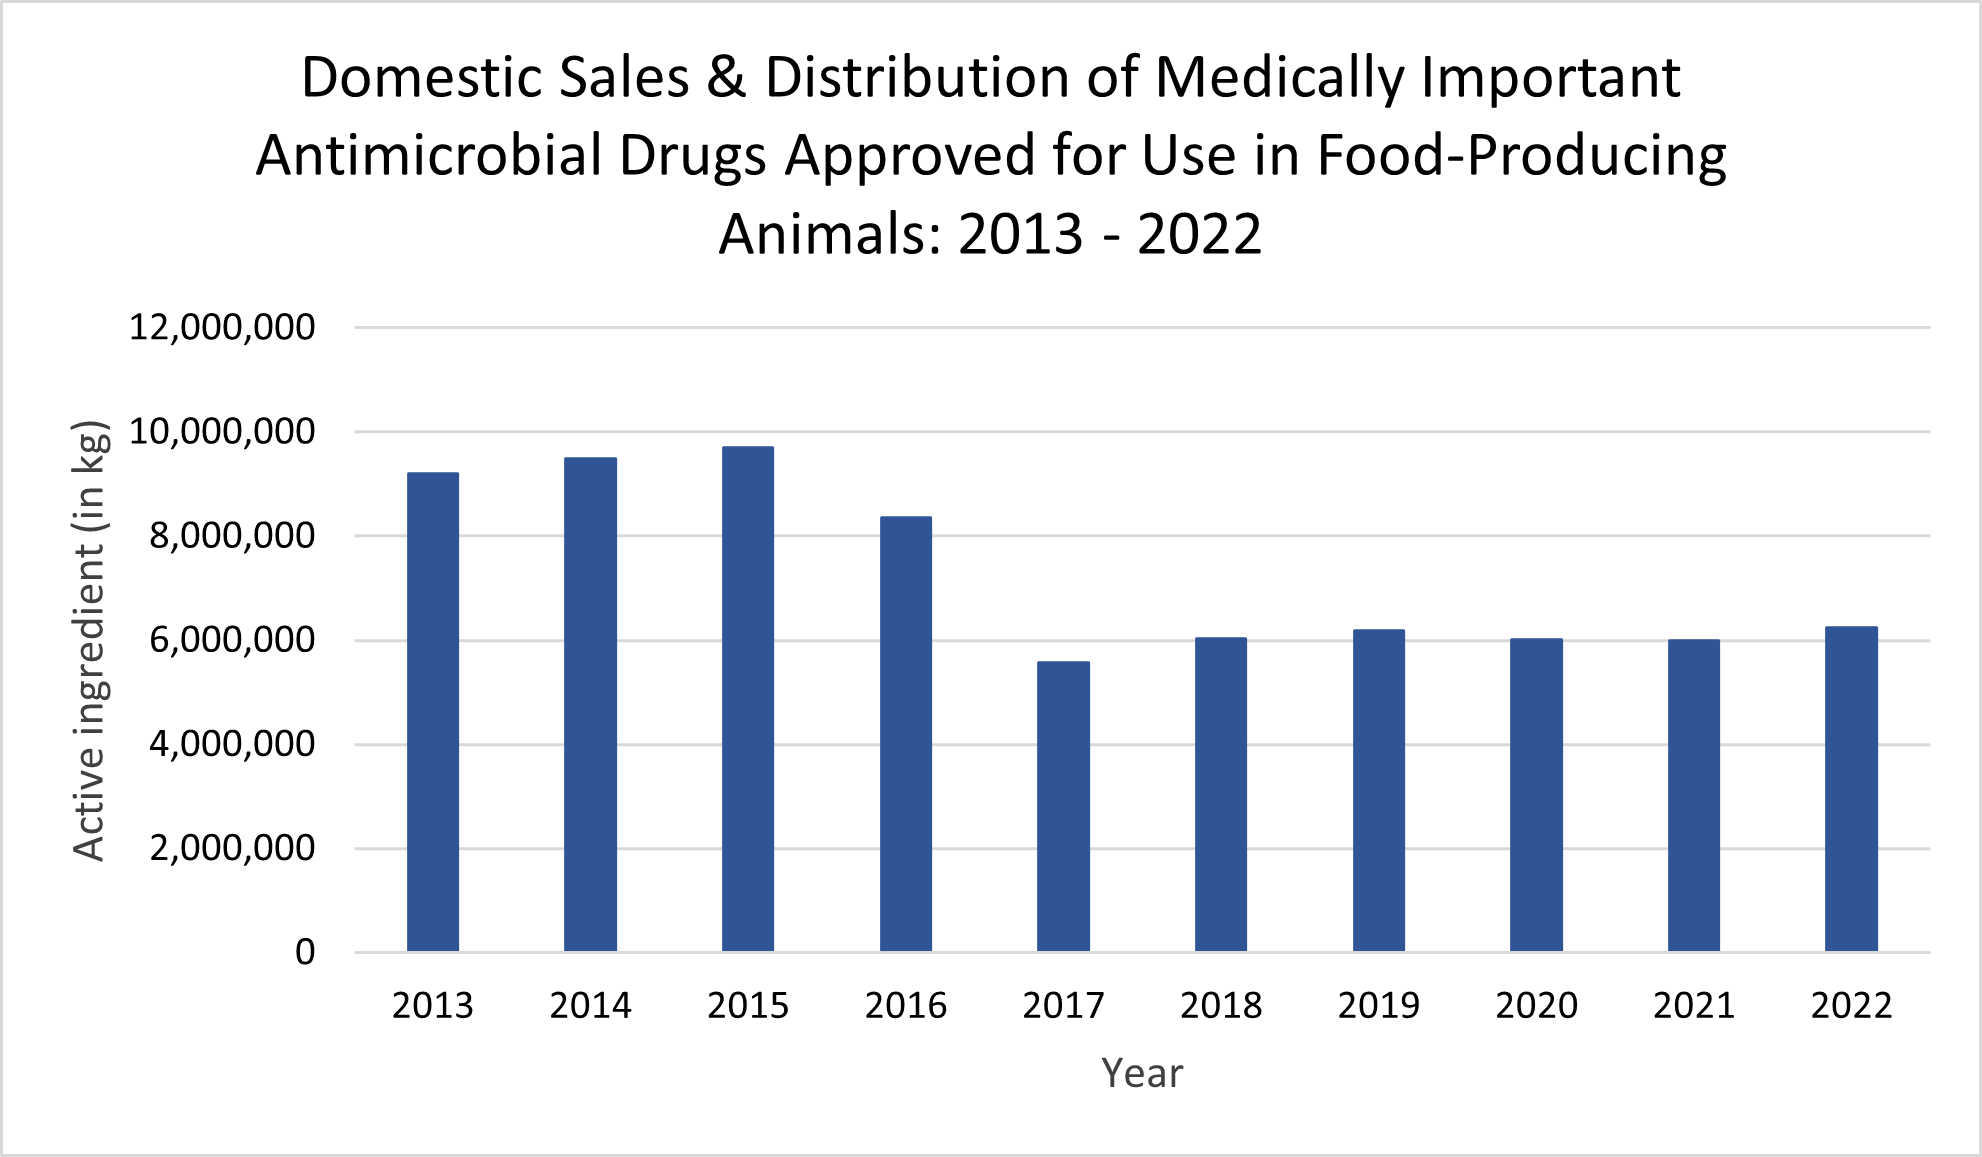 Vertical bar graph titled, "Domestic Sales & Distribution of Medically Important Antimicrobial Drugs Approved for Use in Food-Producing Animals: 2013 - 2022." The years are on the horizontal axis and the volume of drug sales in kilograms is on the vertical axis.